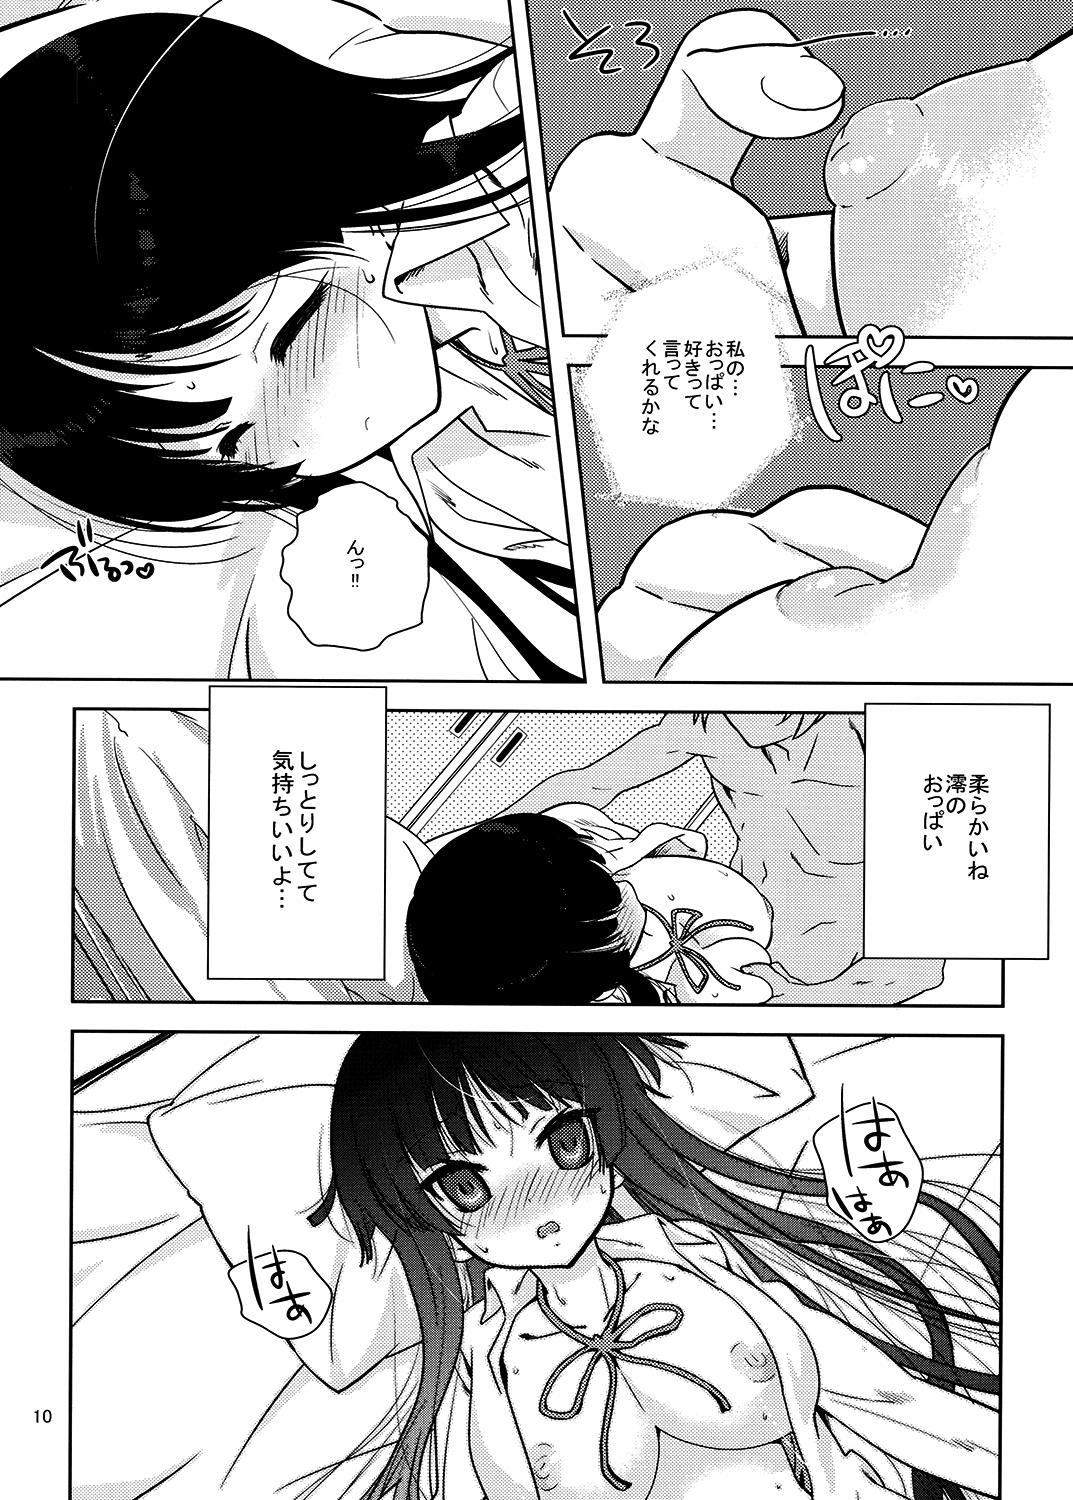 Pussyfucking Mio-tan! - K on Indian - Page 9